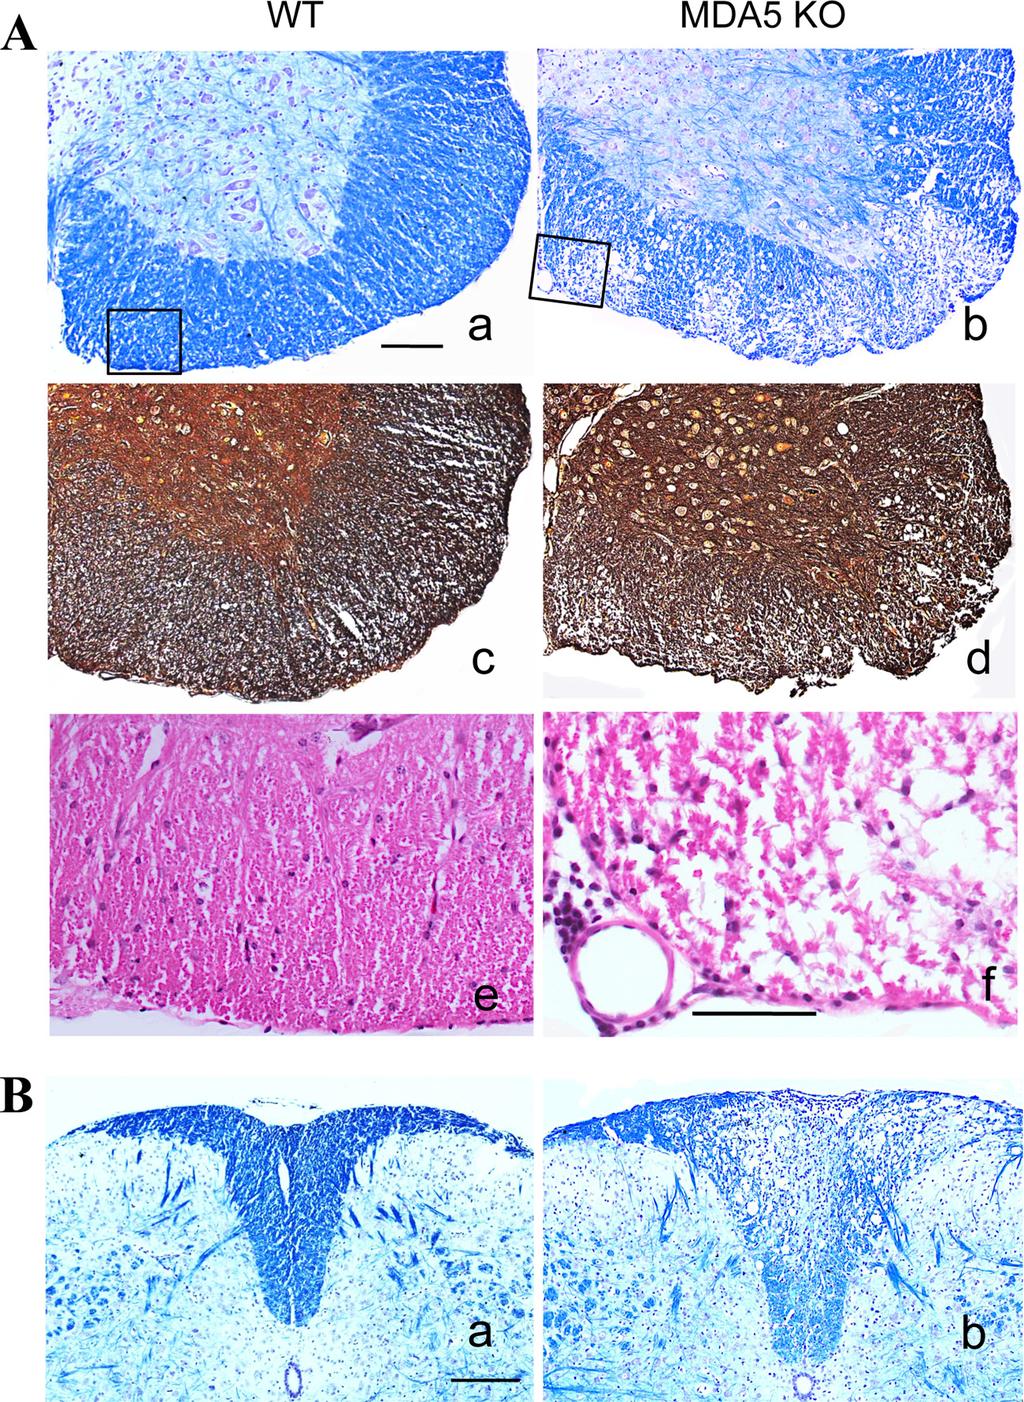 Jin et al. FIG 3 Focal demyelinated lesions and axonal damage in the spinal cords of virus-infected MDA5 KO mice.